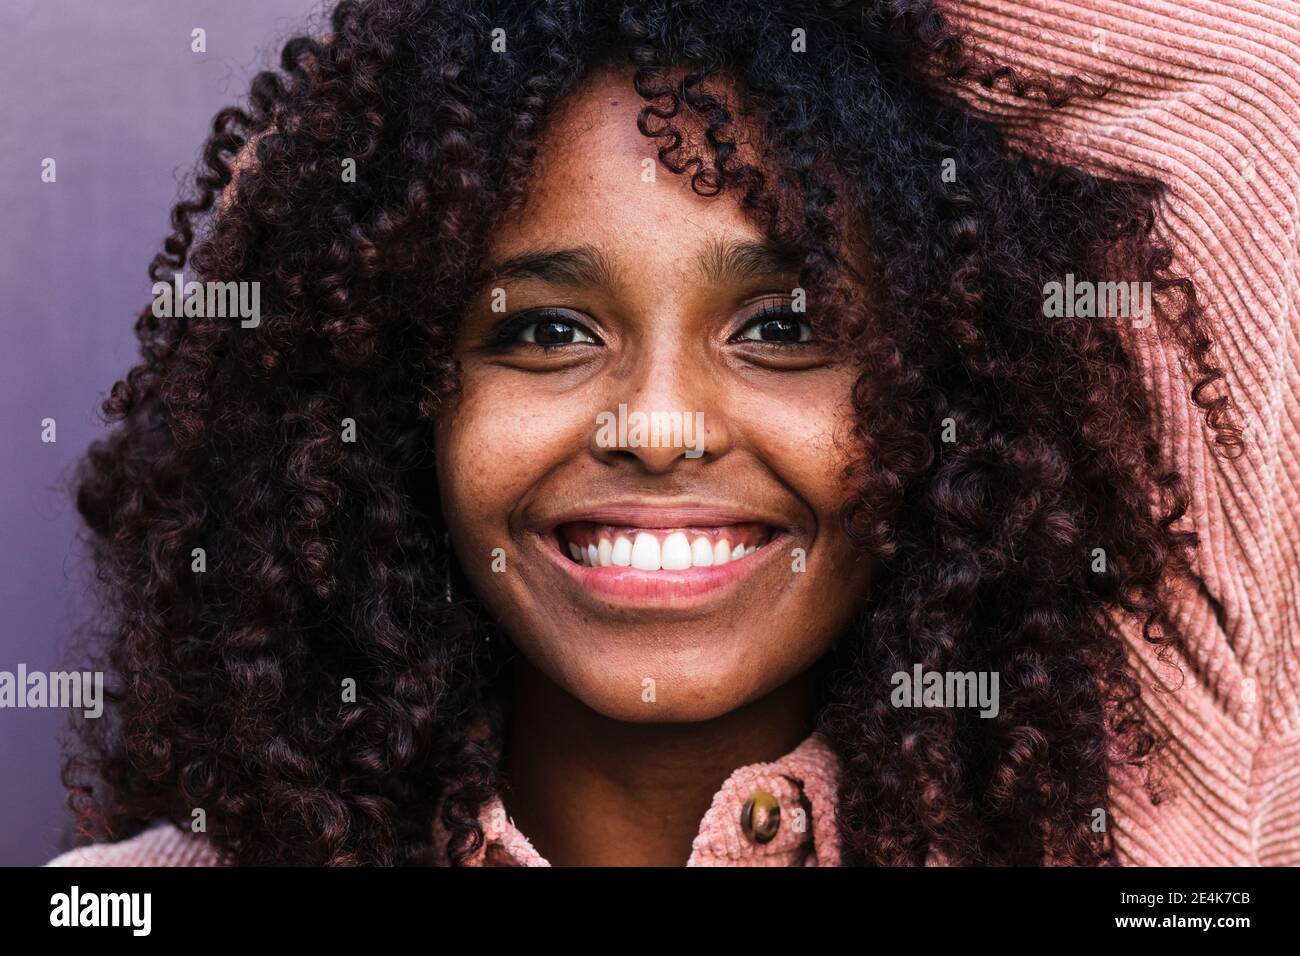 Happy afro young woman with curly hair against wall Stock Photo